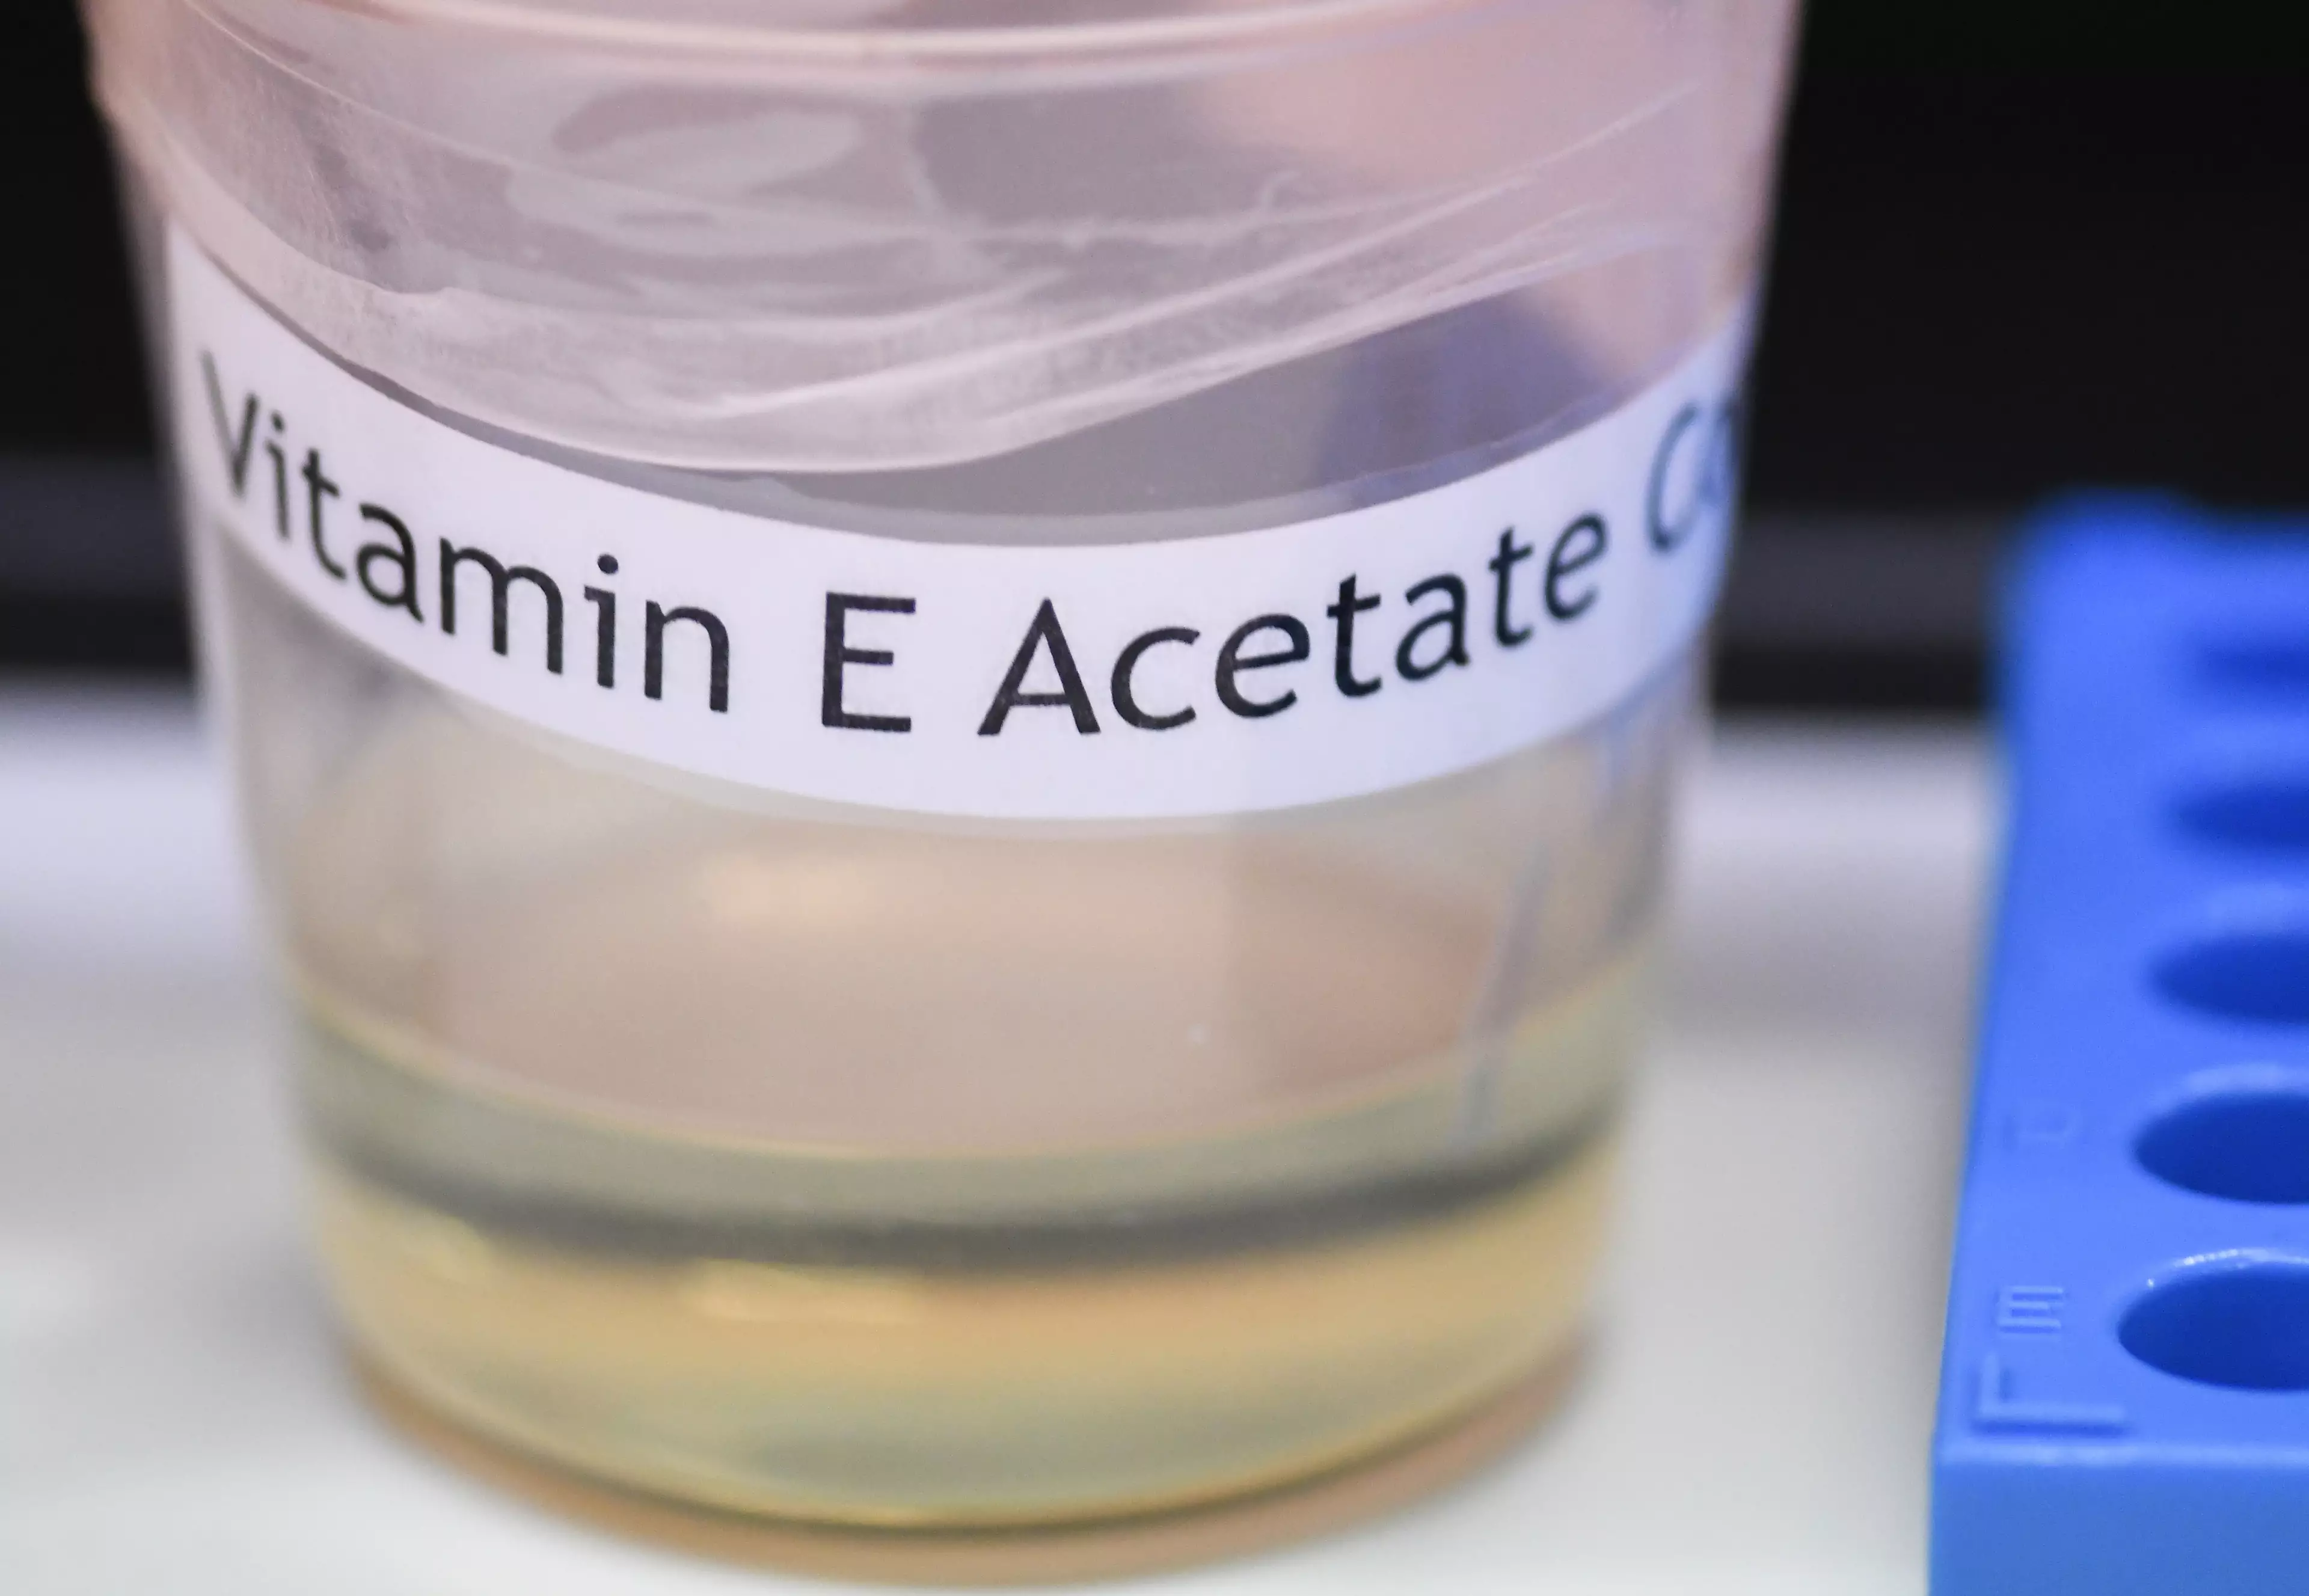 Vitamin E acetate was found in 29 lung samples.